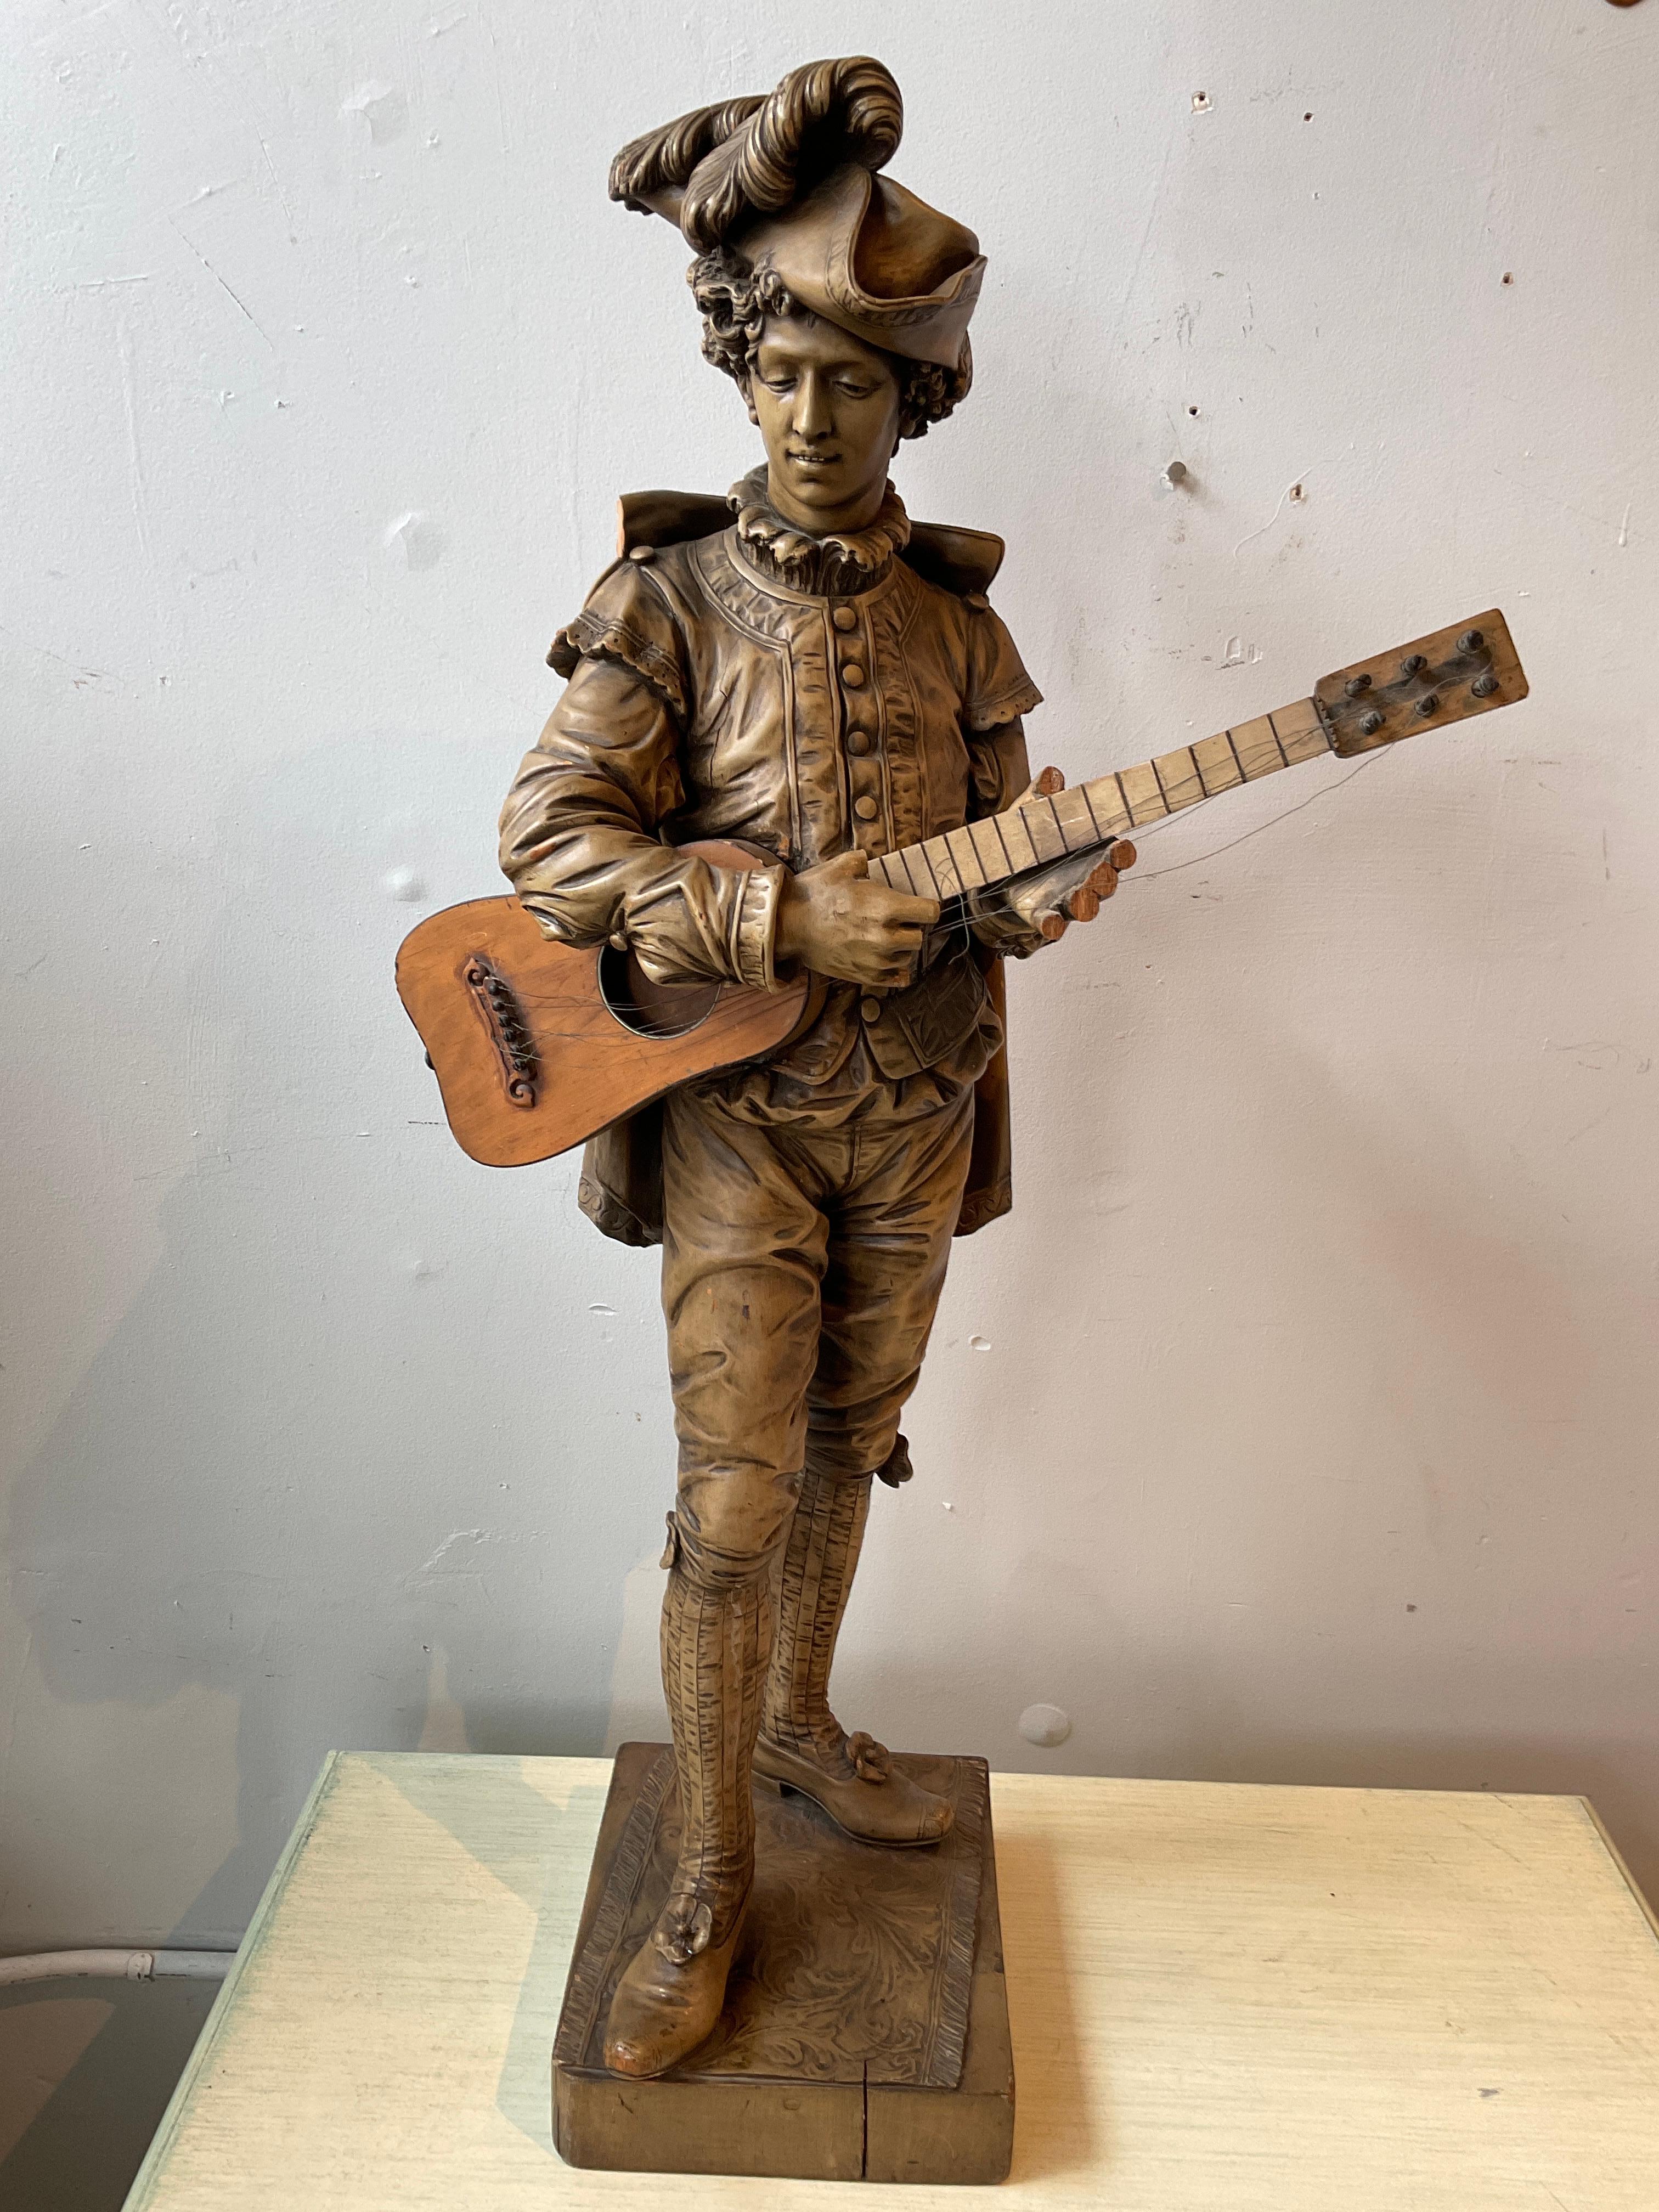 Large Italian 1880s carved wood figure of Figaro. Nicely carved. Fingers missing. Piece of collar missing. Strings on guitar need restringing.